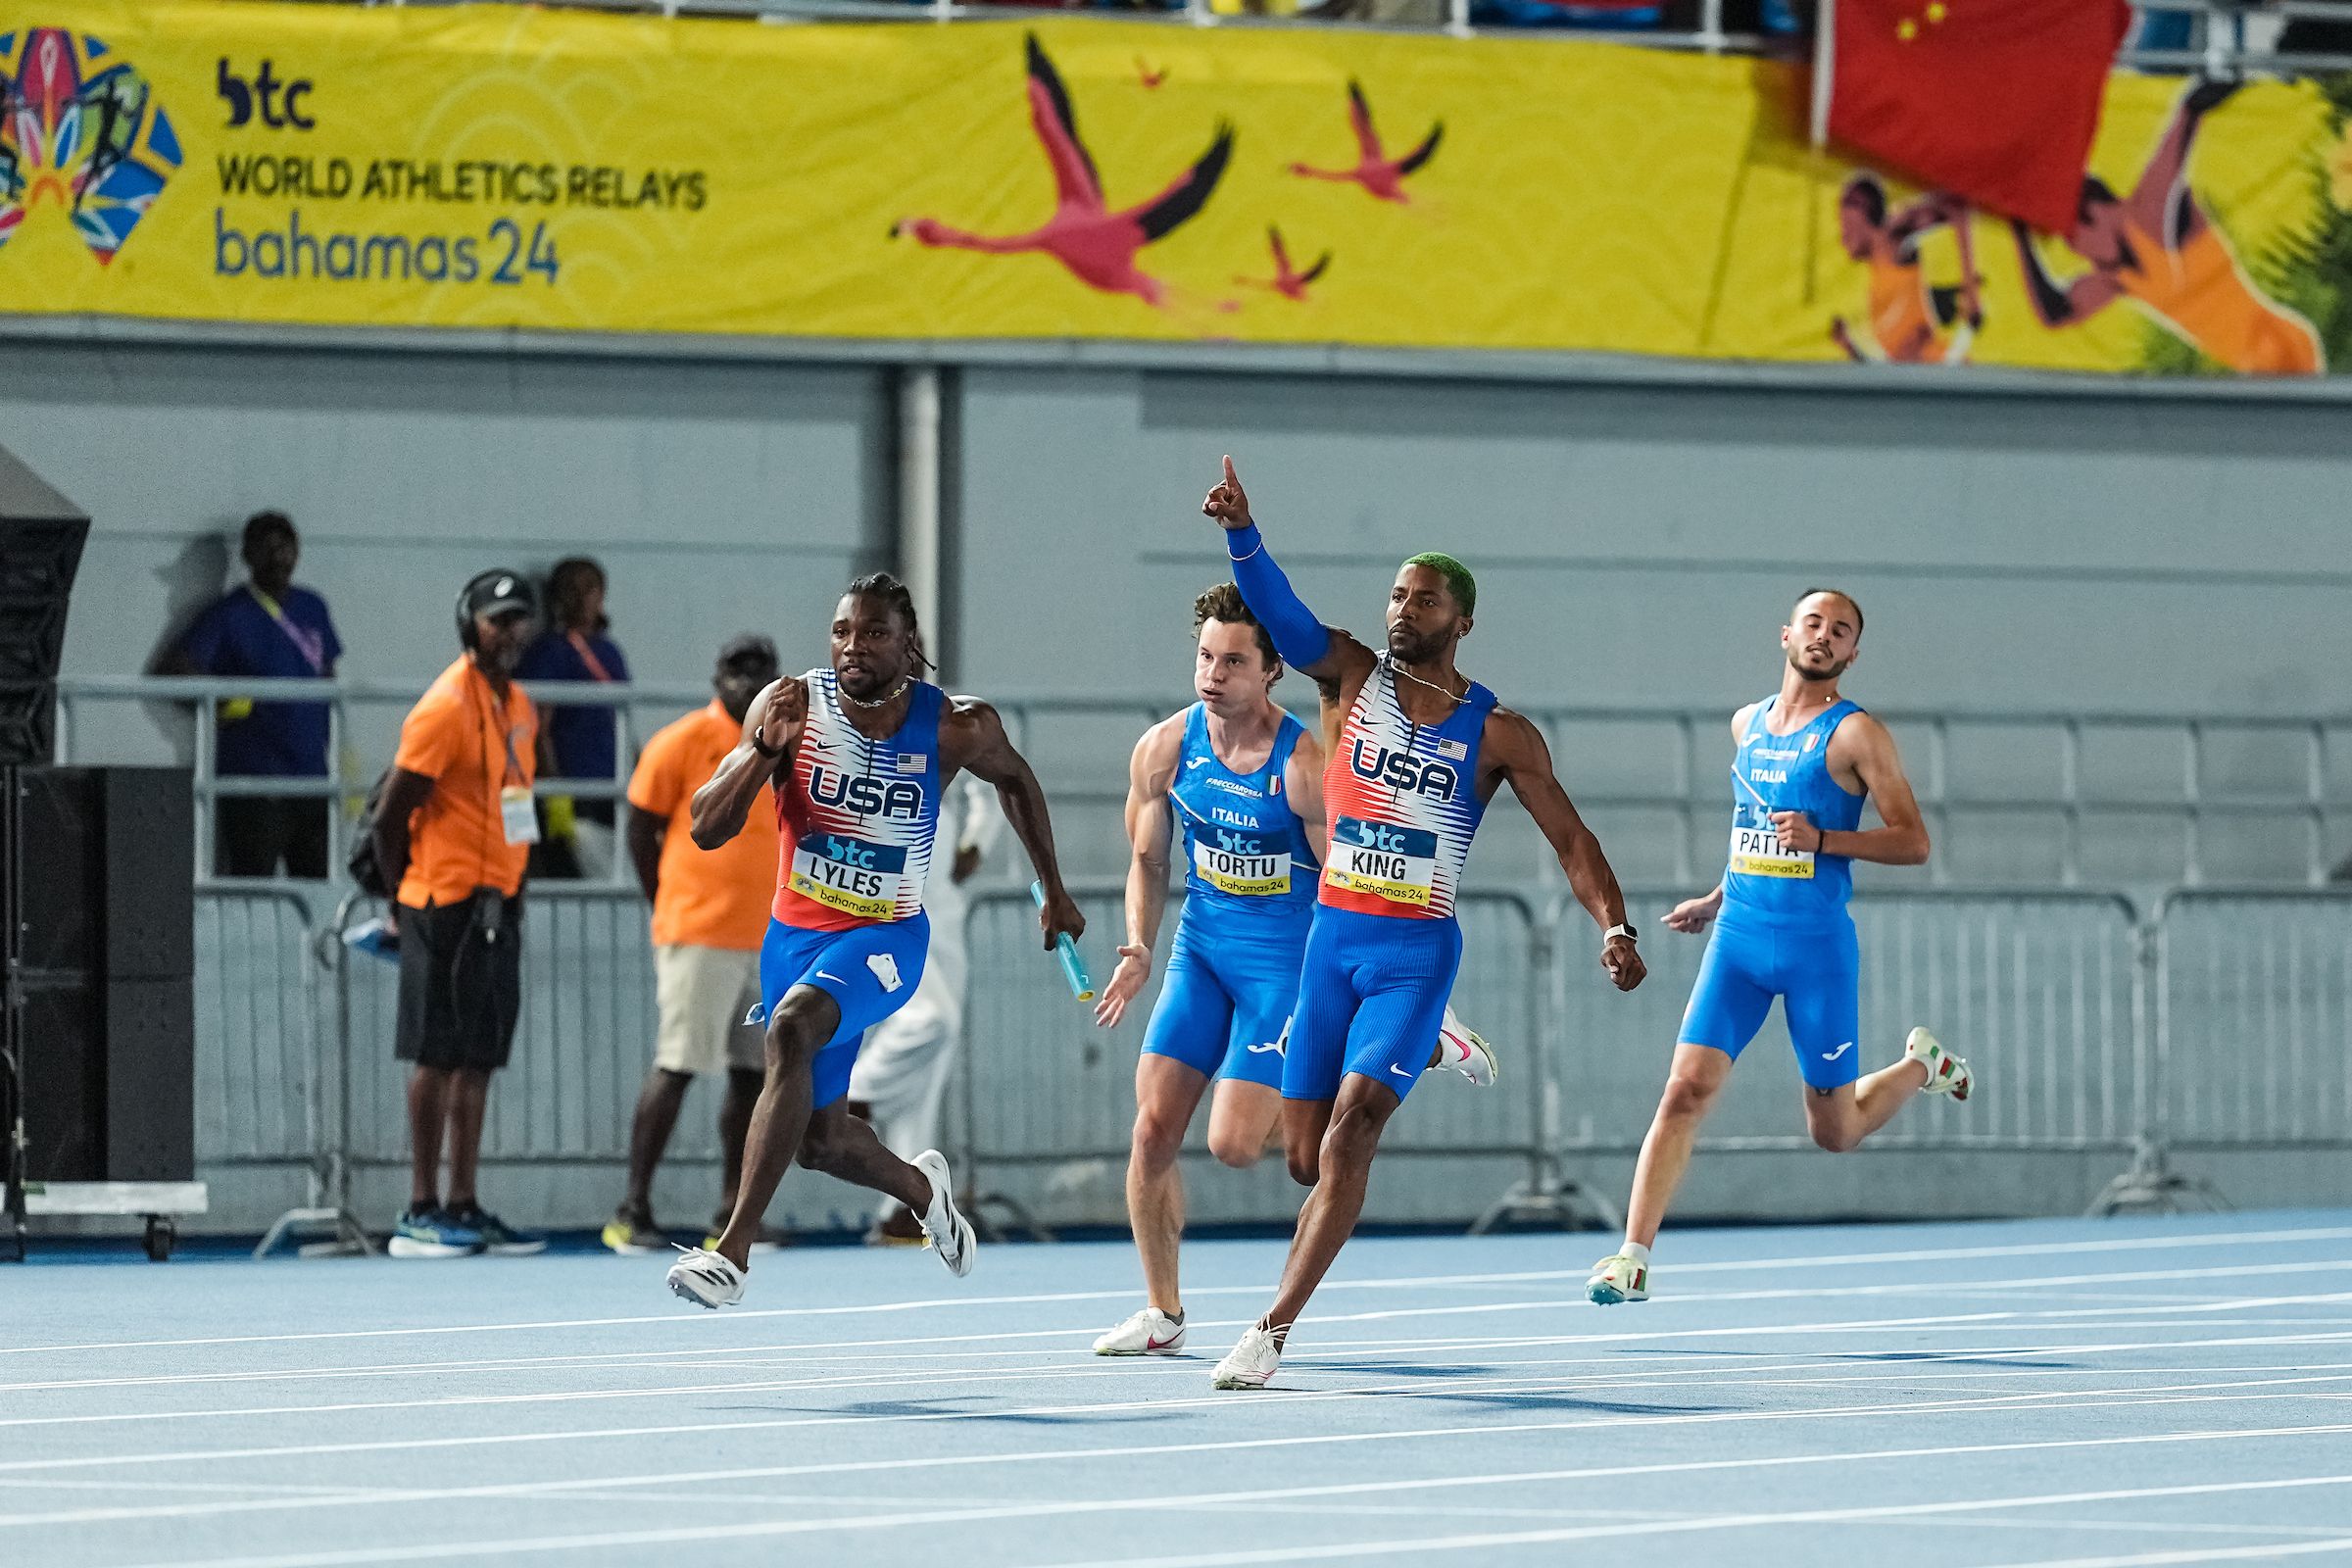 Noah Lyles heads out for the final leg of the men's 4x100m at the WRE Bahamas 24